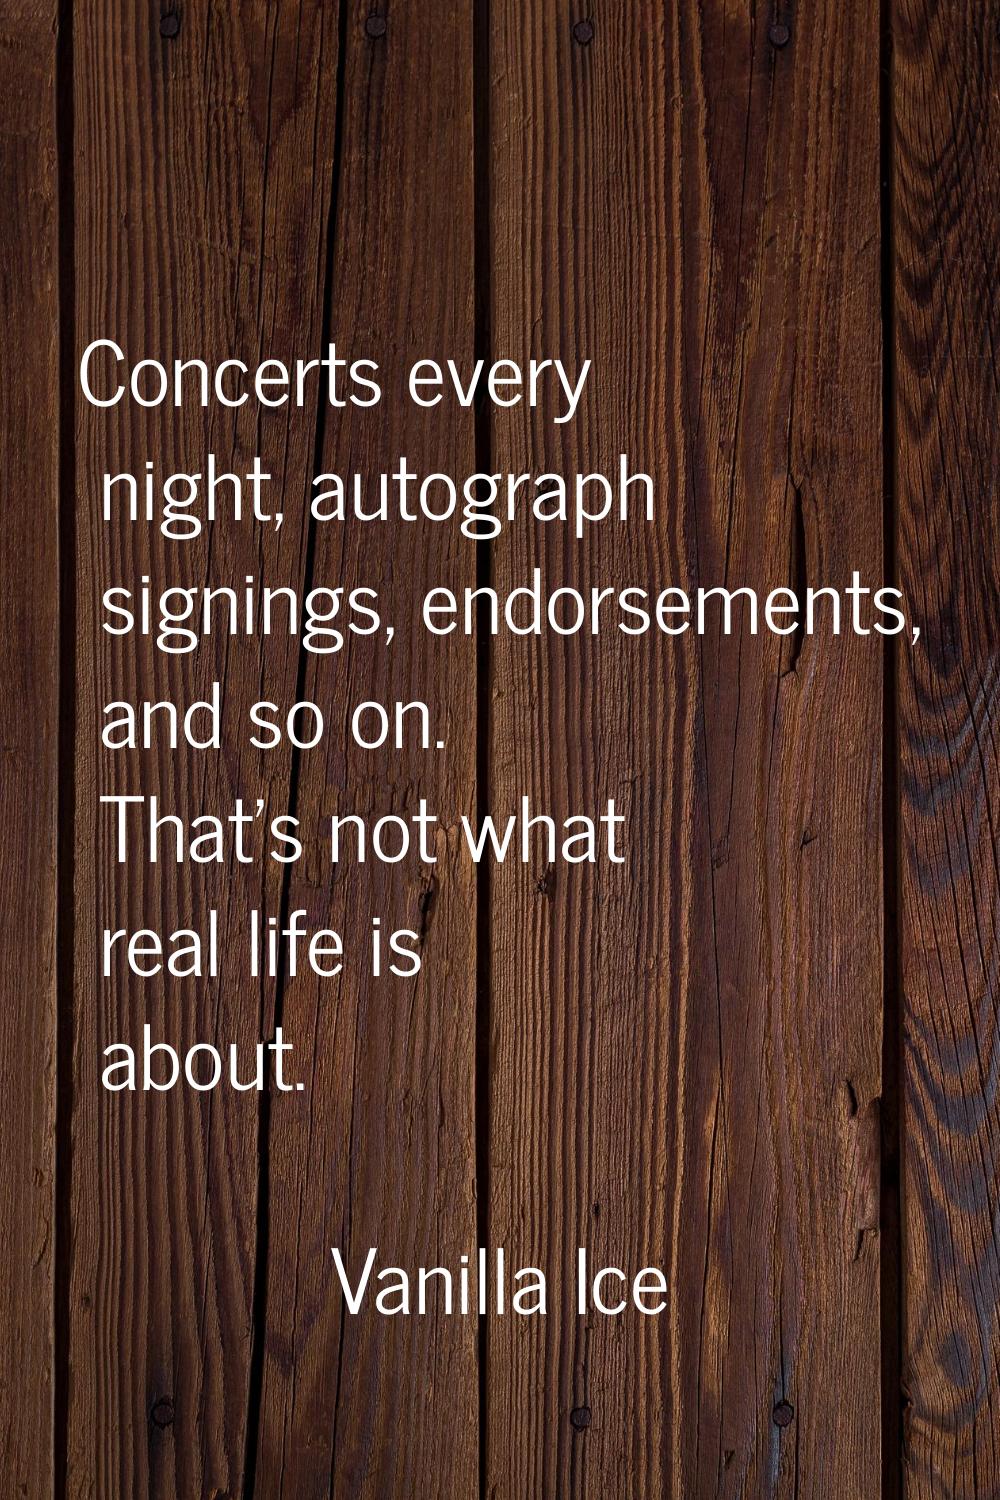 Concerts every night, autograph signings, endorsements, and so on. That's not what real life is abo